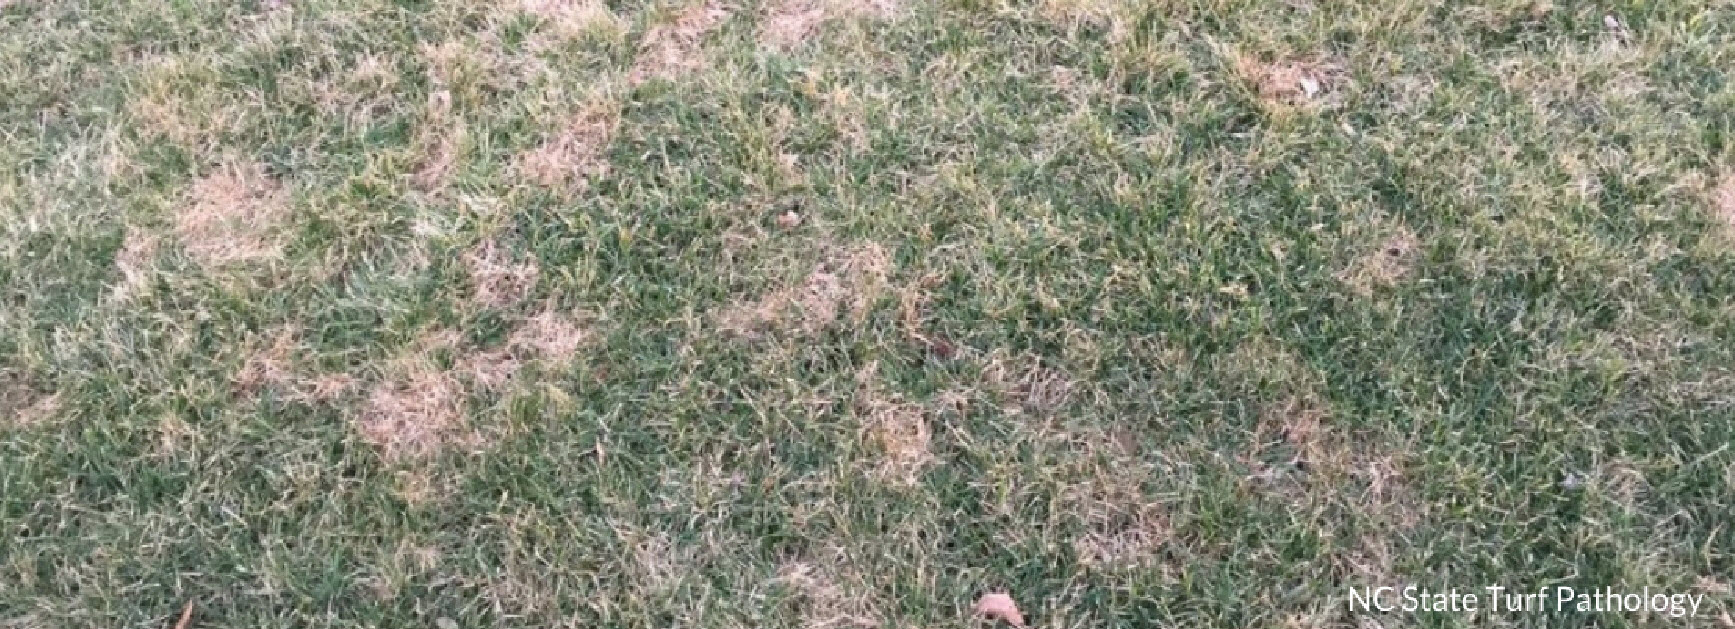 pink snow mold lawn disease